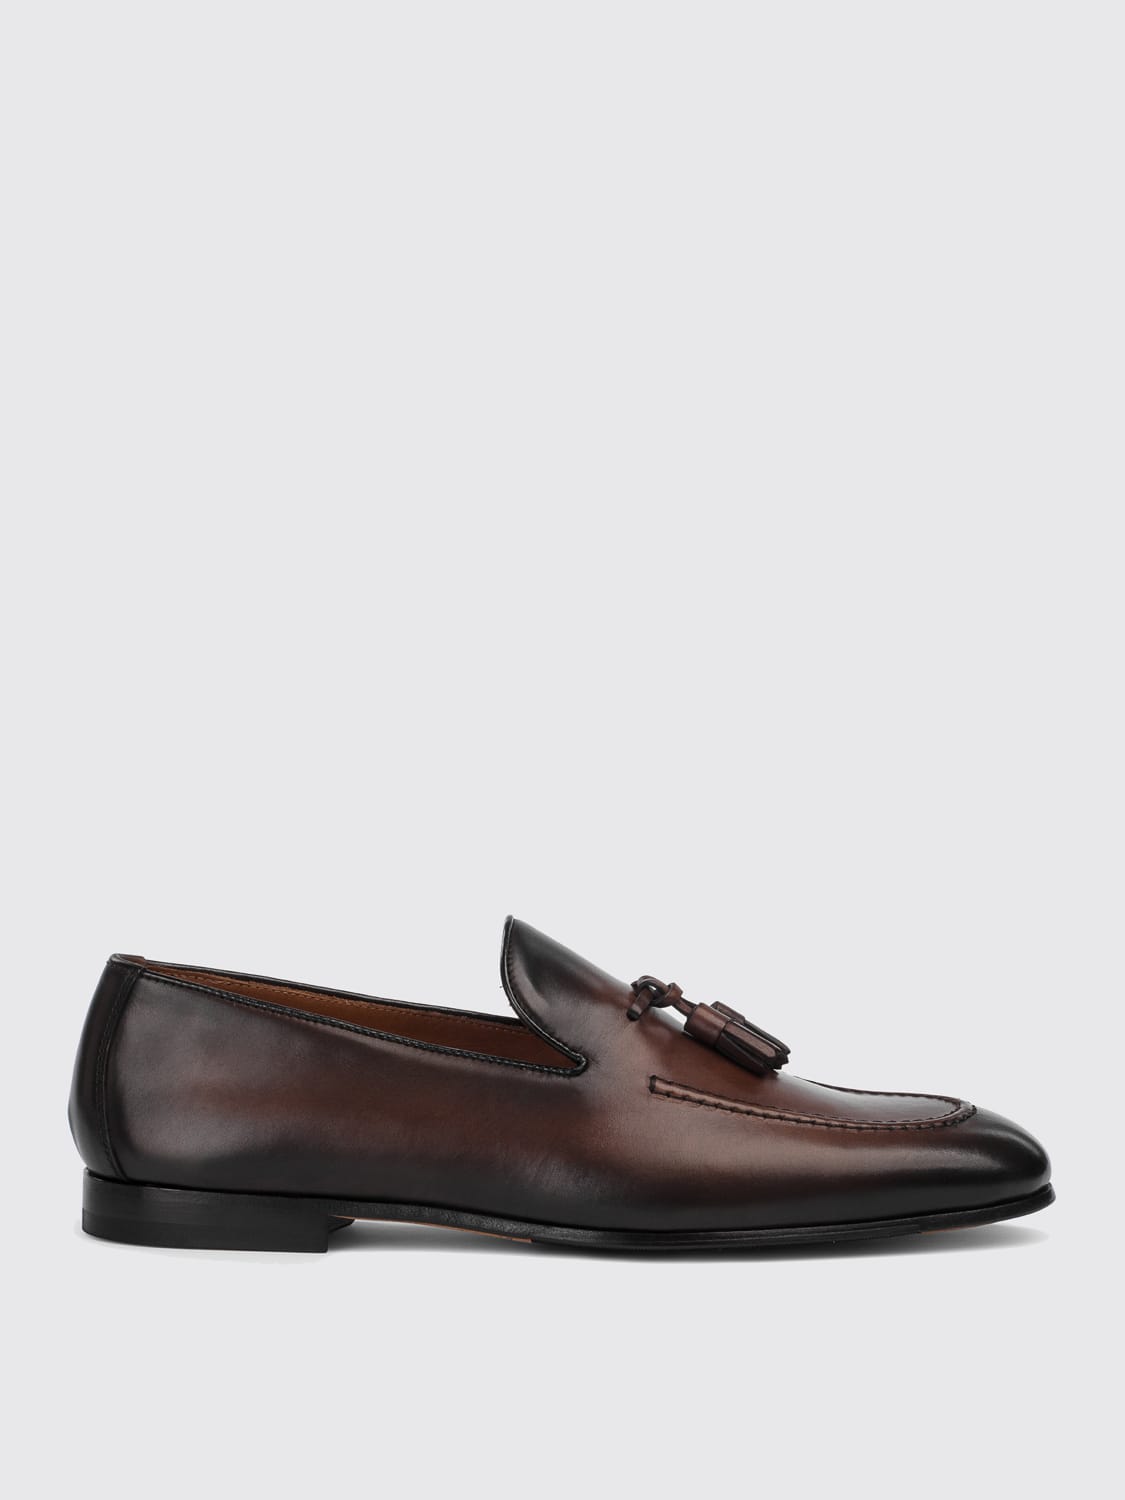 Doucal's interwoven leather loafers - Brown